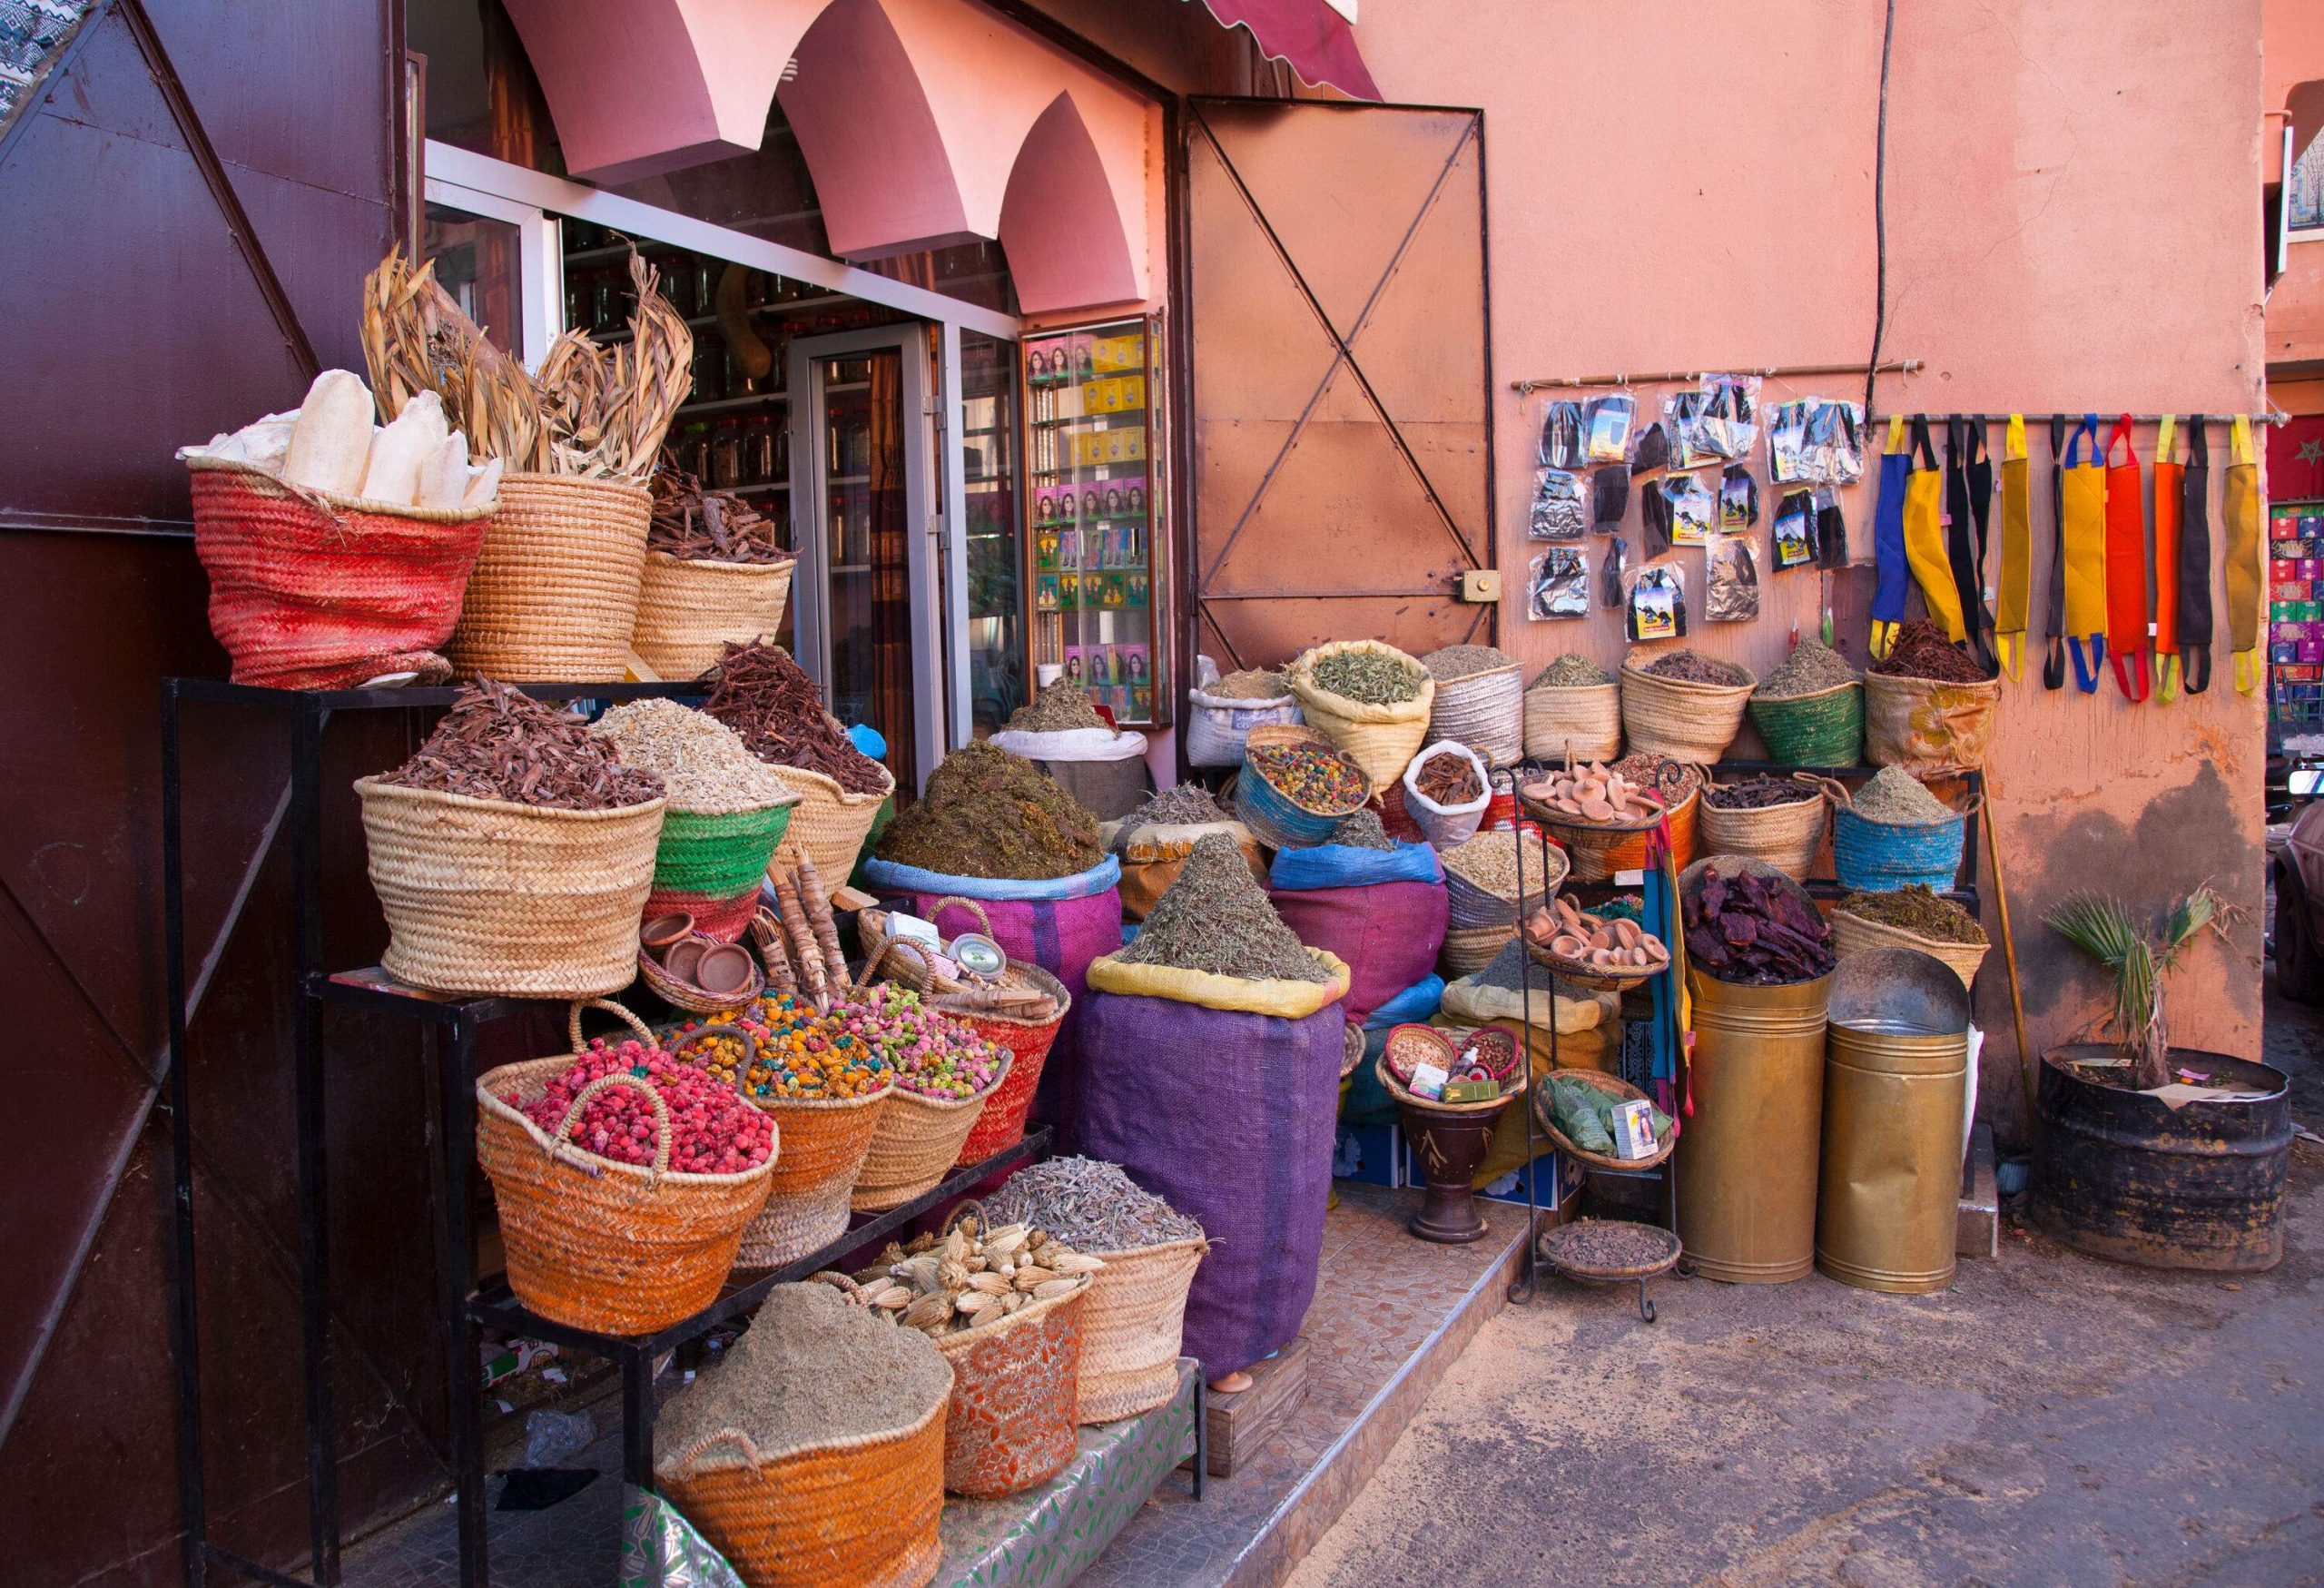 A store with an outdoor display of herbs and spices in straw baskets and woven sacks.